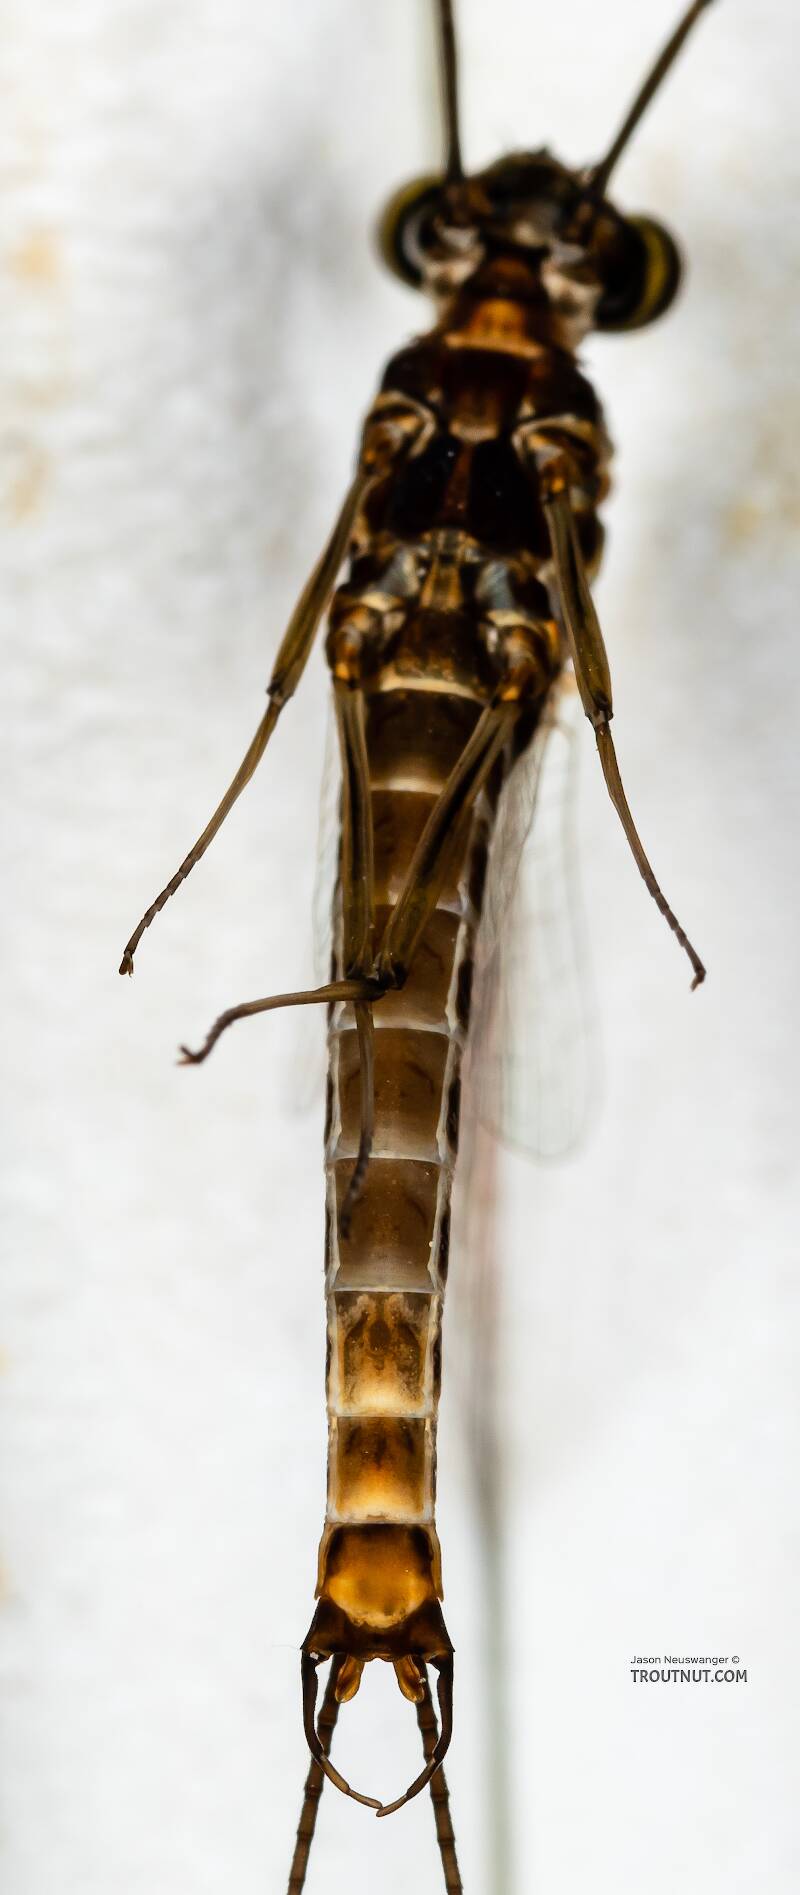 Ventral view of a Male Rhithrogena hageni (Heptageniidae) (Western Black Quill) Mayfly Spinner from the Ruby River in Montana